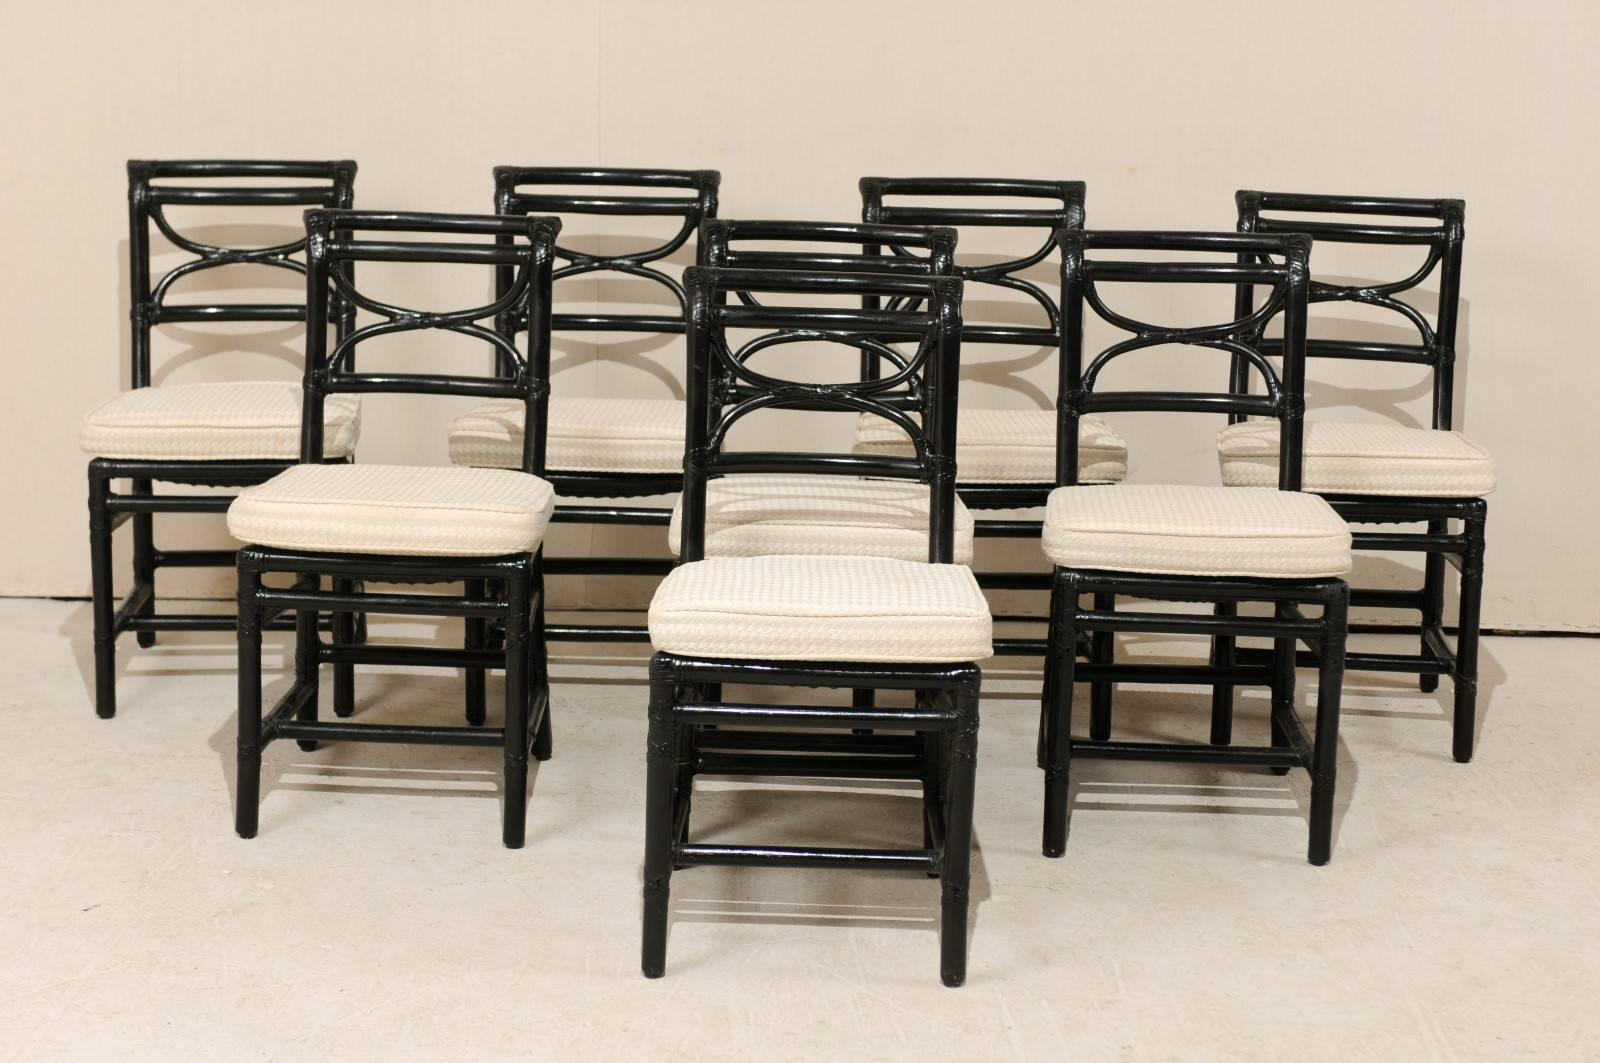 A set of eight vintage McGuire rattan side chairs. This set of side chairs from McGuire furniture maker, feature a rattan frame/body with a centered Curule back splat and outward curved top rail. The chairs are painted in a glossy black with